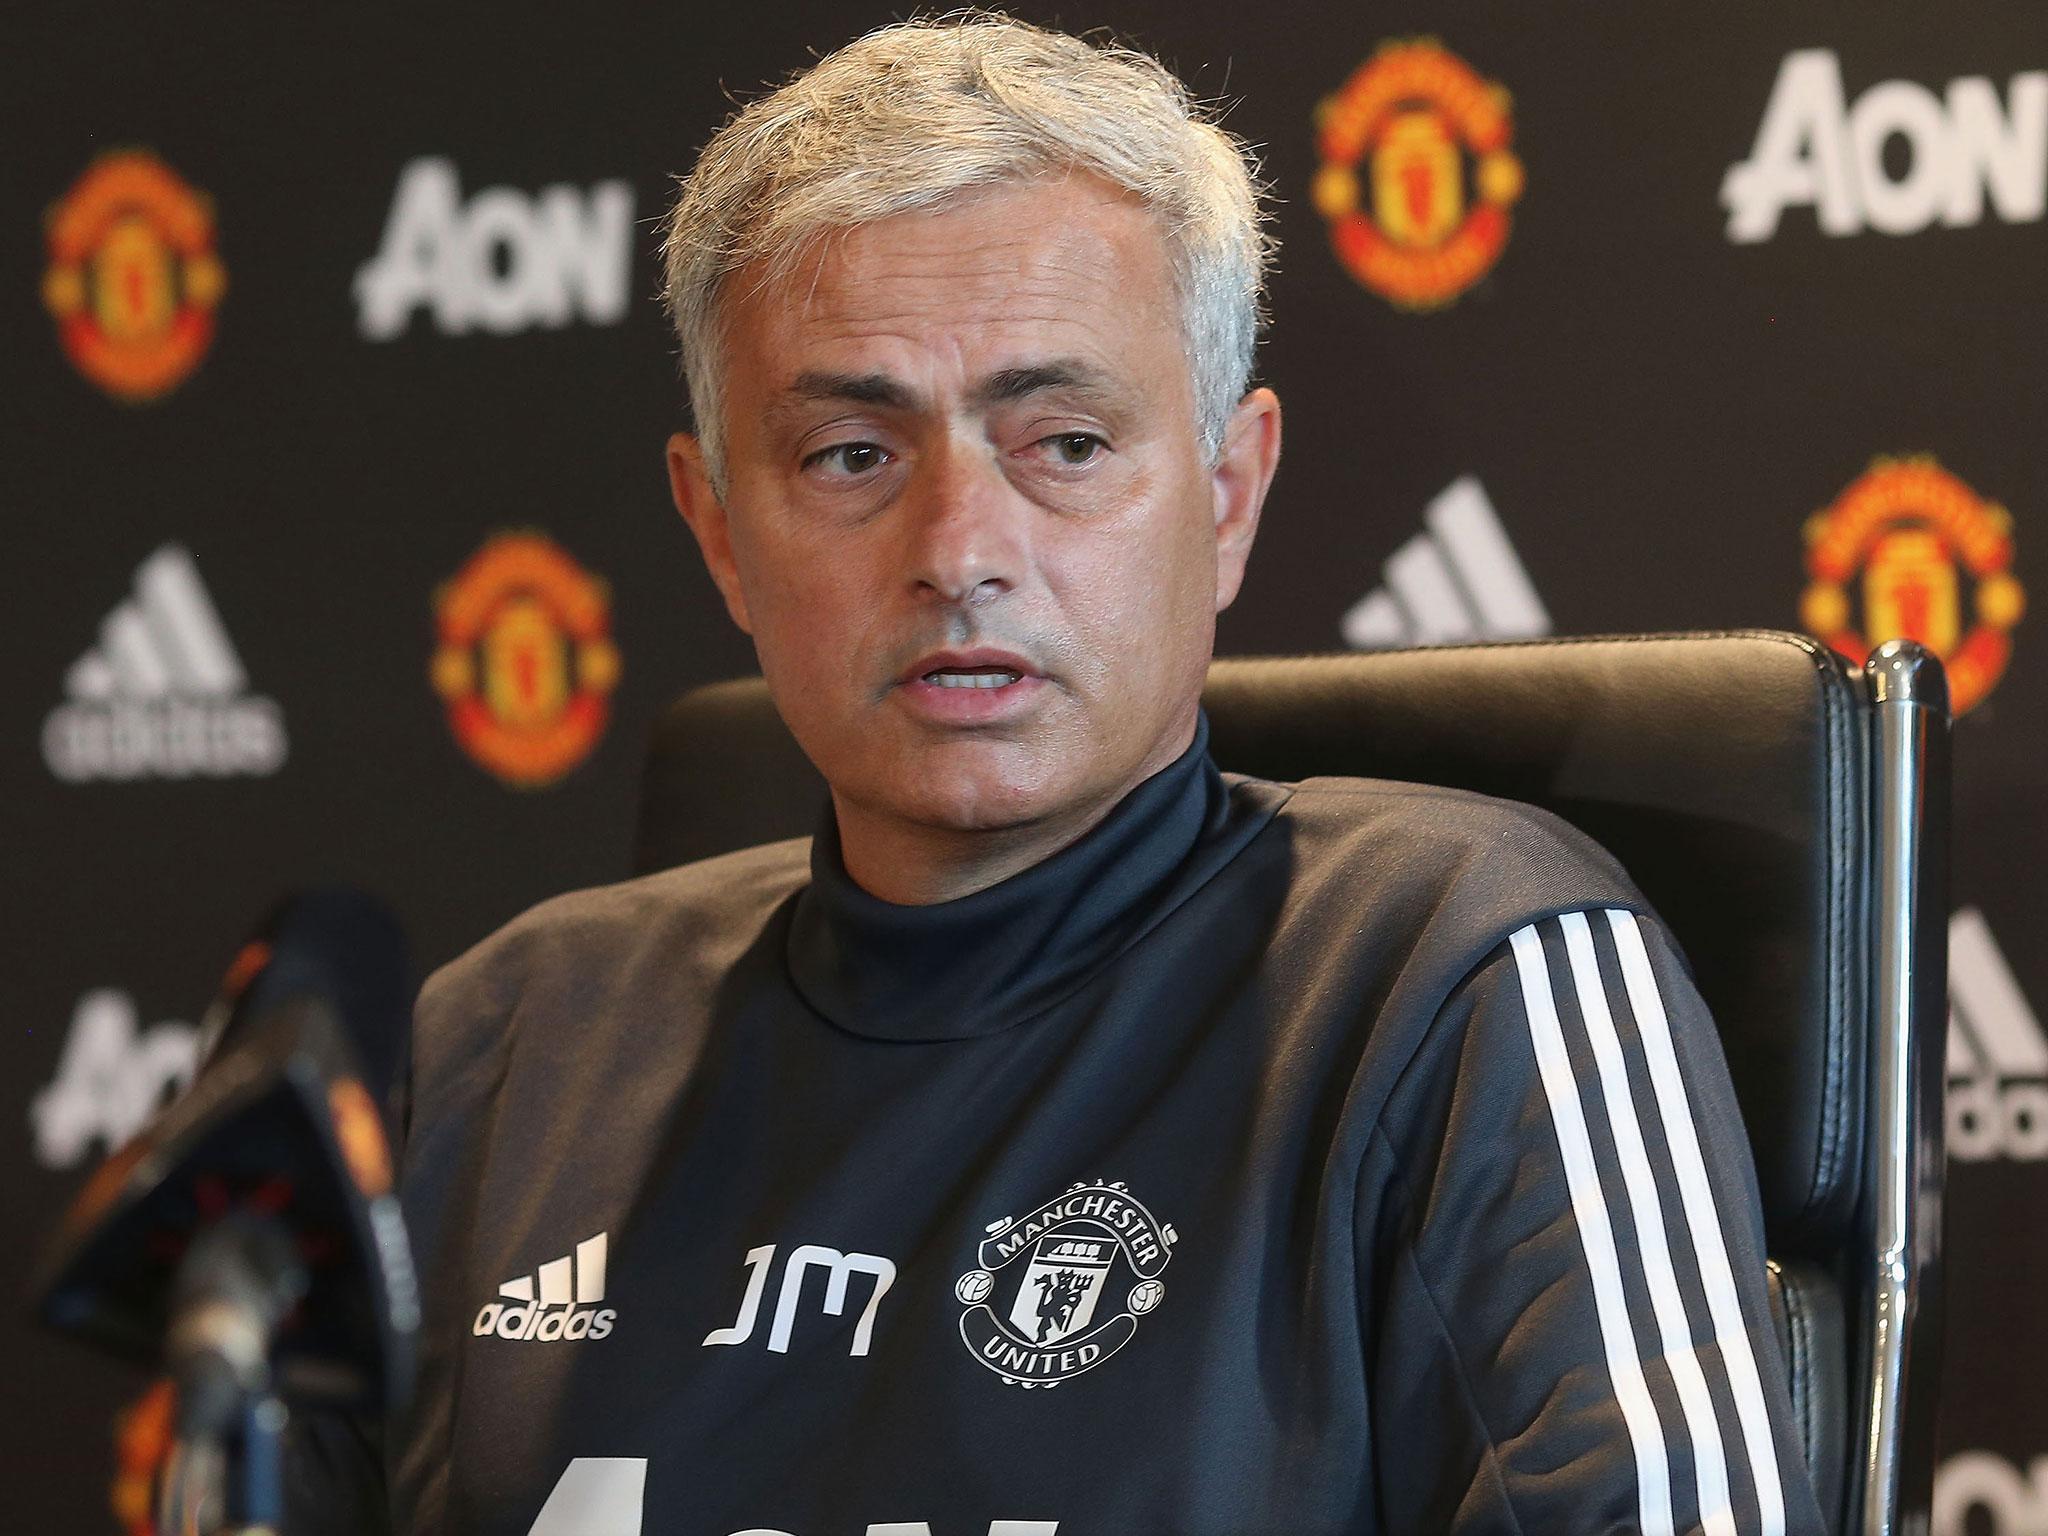 Jose Mourinho said he was happy with his current United squad